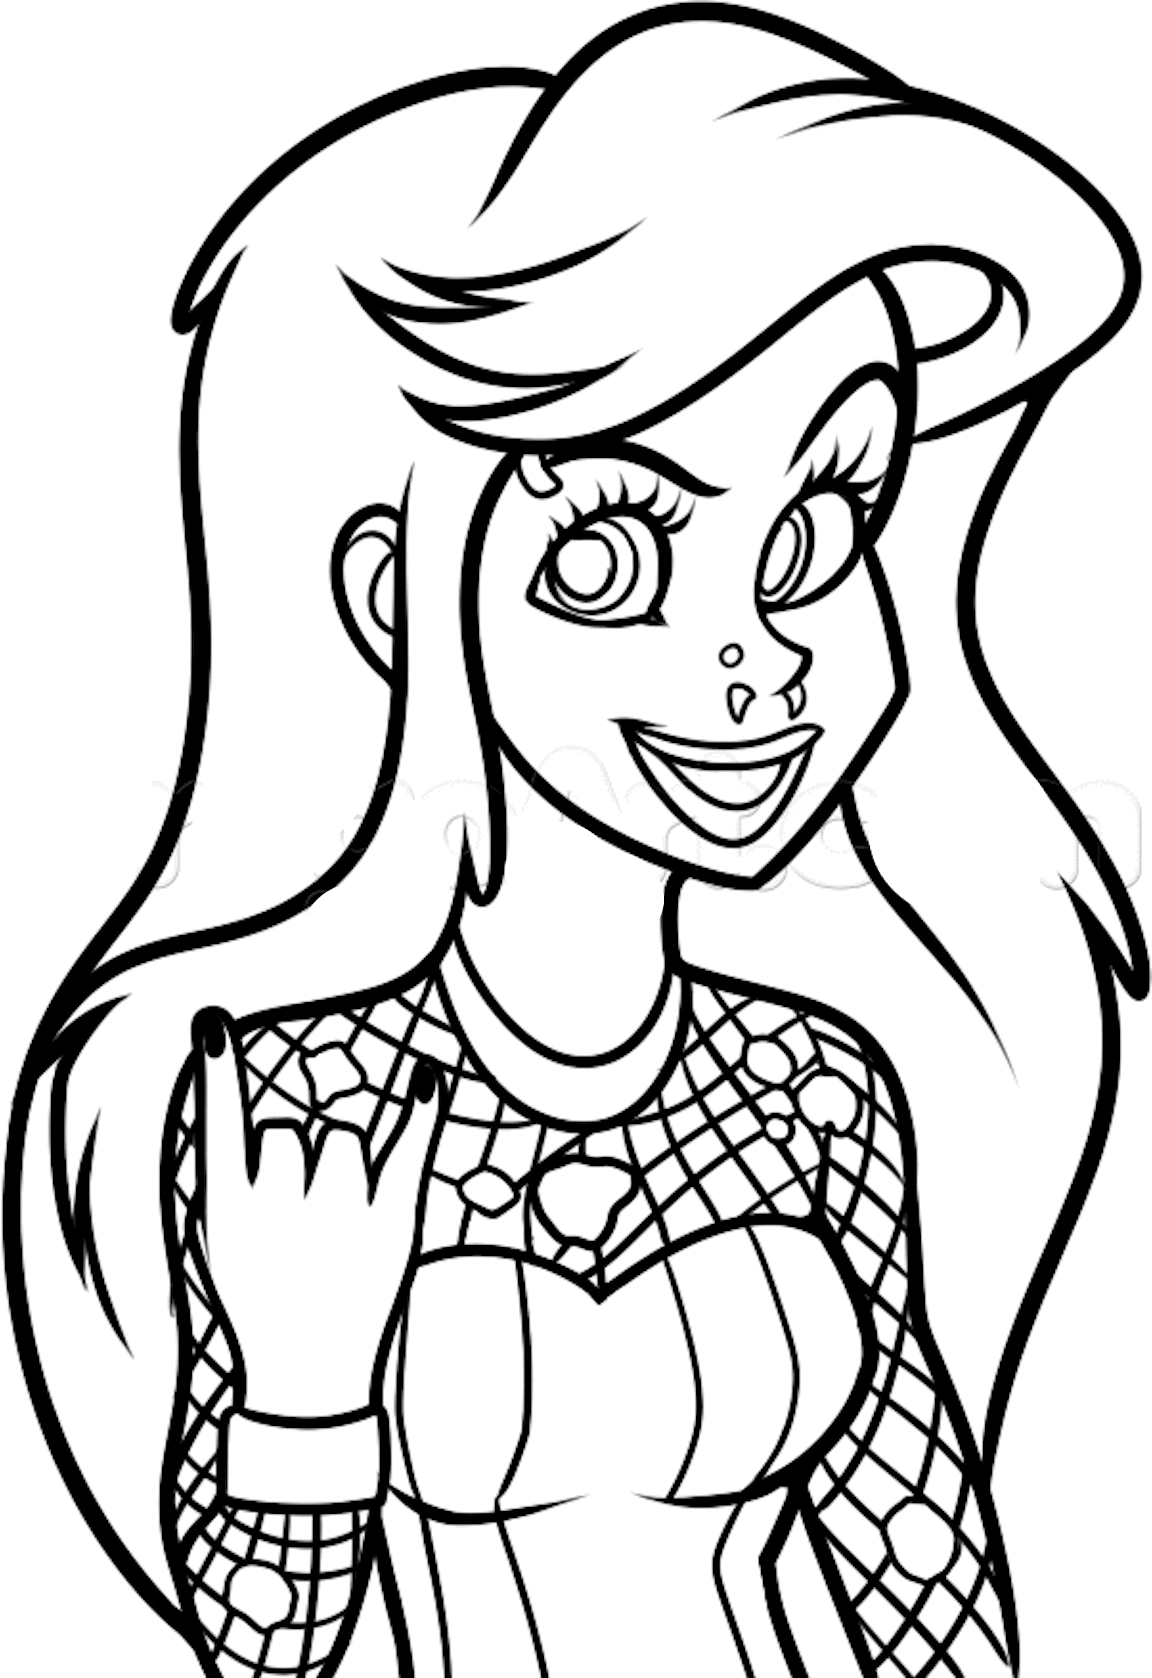 International Disney Princess Coloring Pages And More Coloring Themes